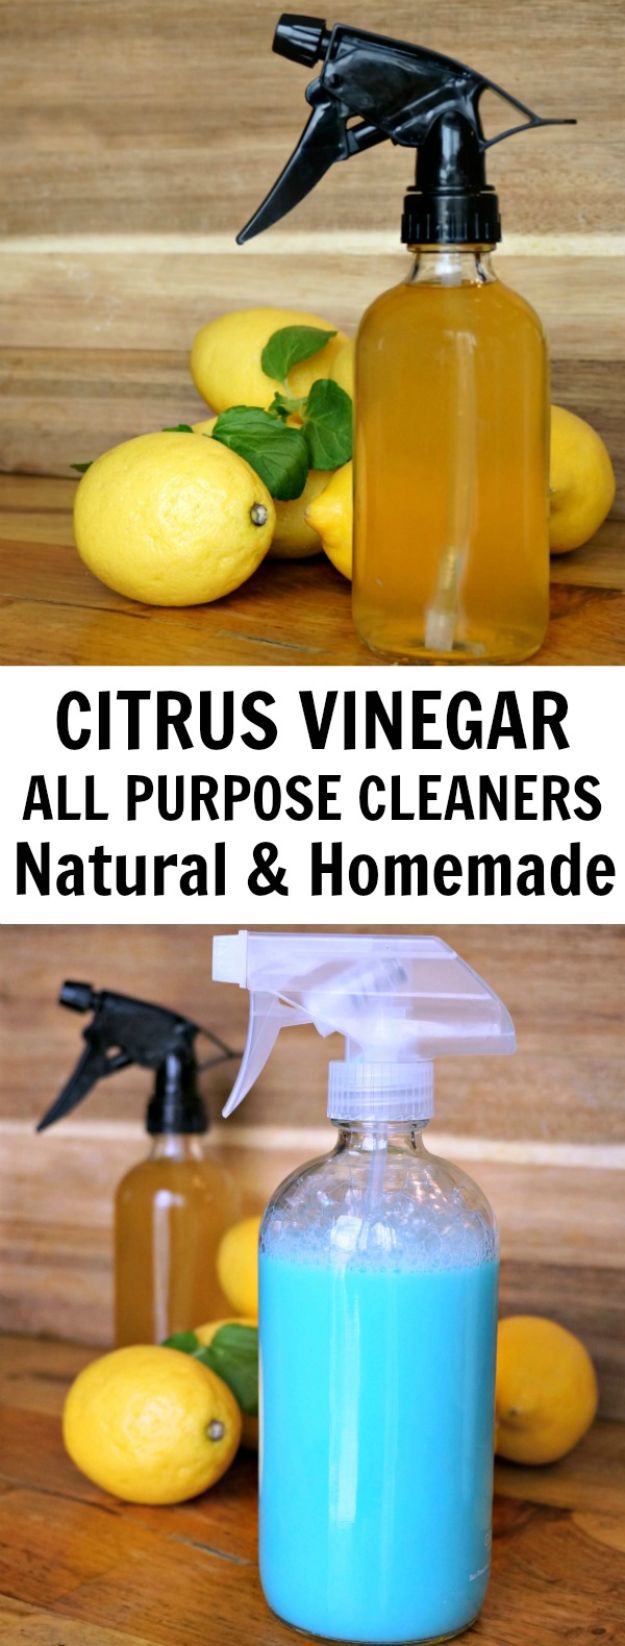 Homemade Cleaning Products - Citrus Vinegar All Purpose Cleaners - DIY Cleaners With Recipe and Tutorial - Make DIY Natural and ll Purpose Cleaner Recipes for Home With Vinegar, Essential Oils